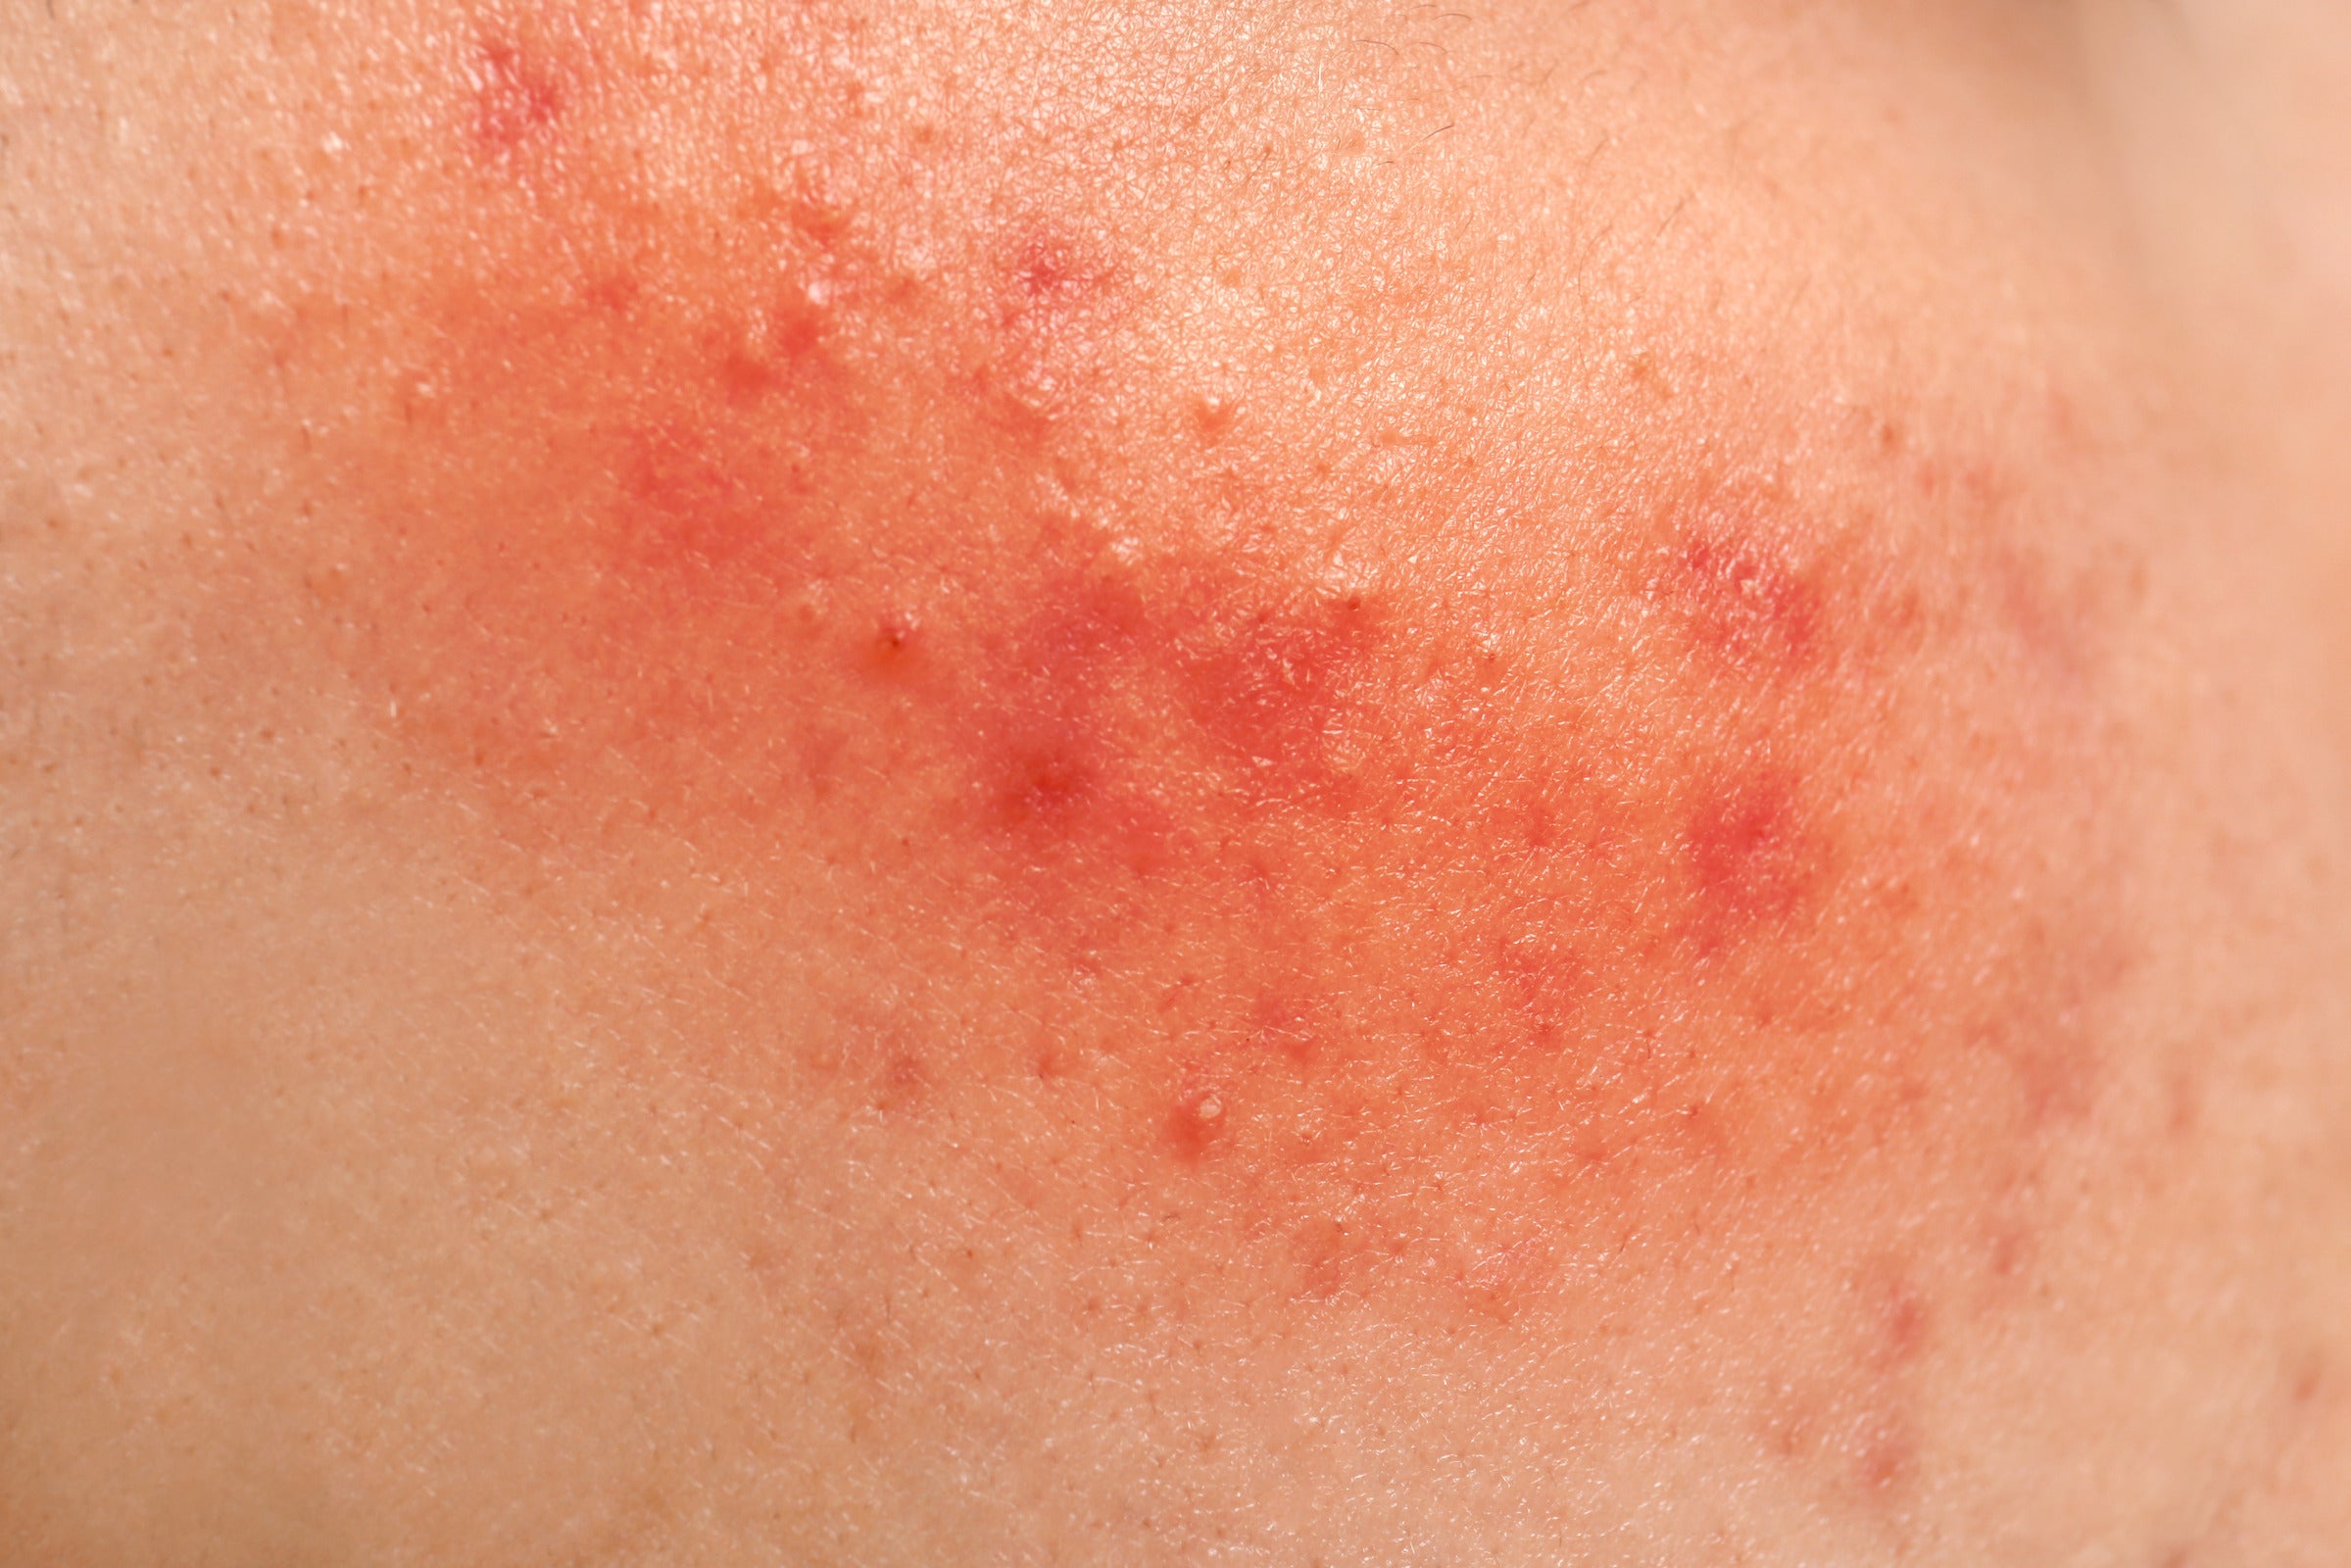 Skin irritation from over-the-counter hemorrhoid creams